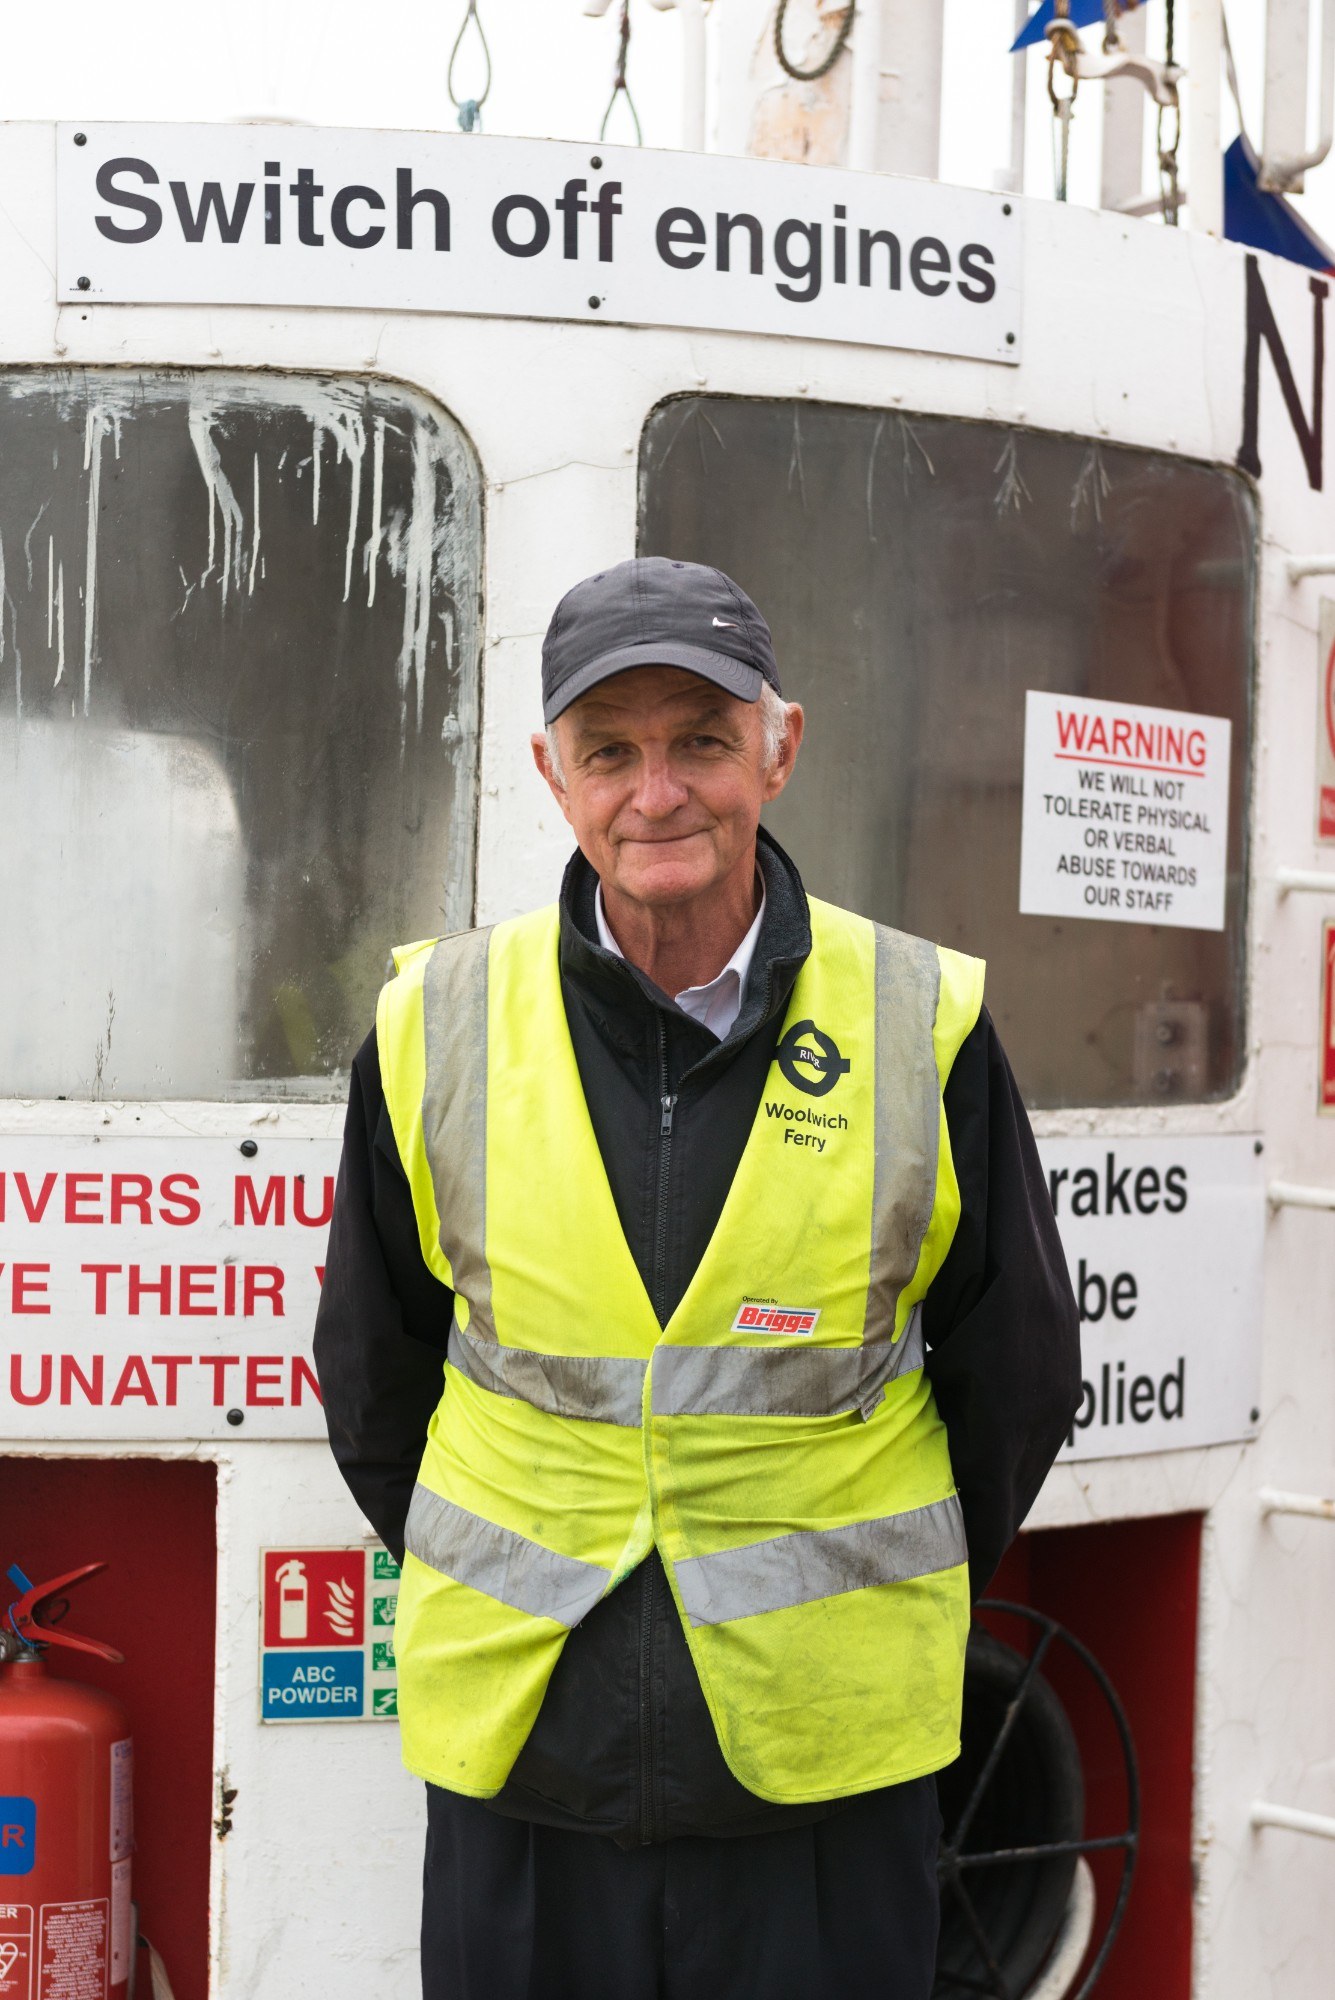 Portrait of ferry operator, with sign saying "switch off engines"